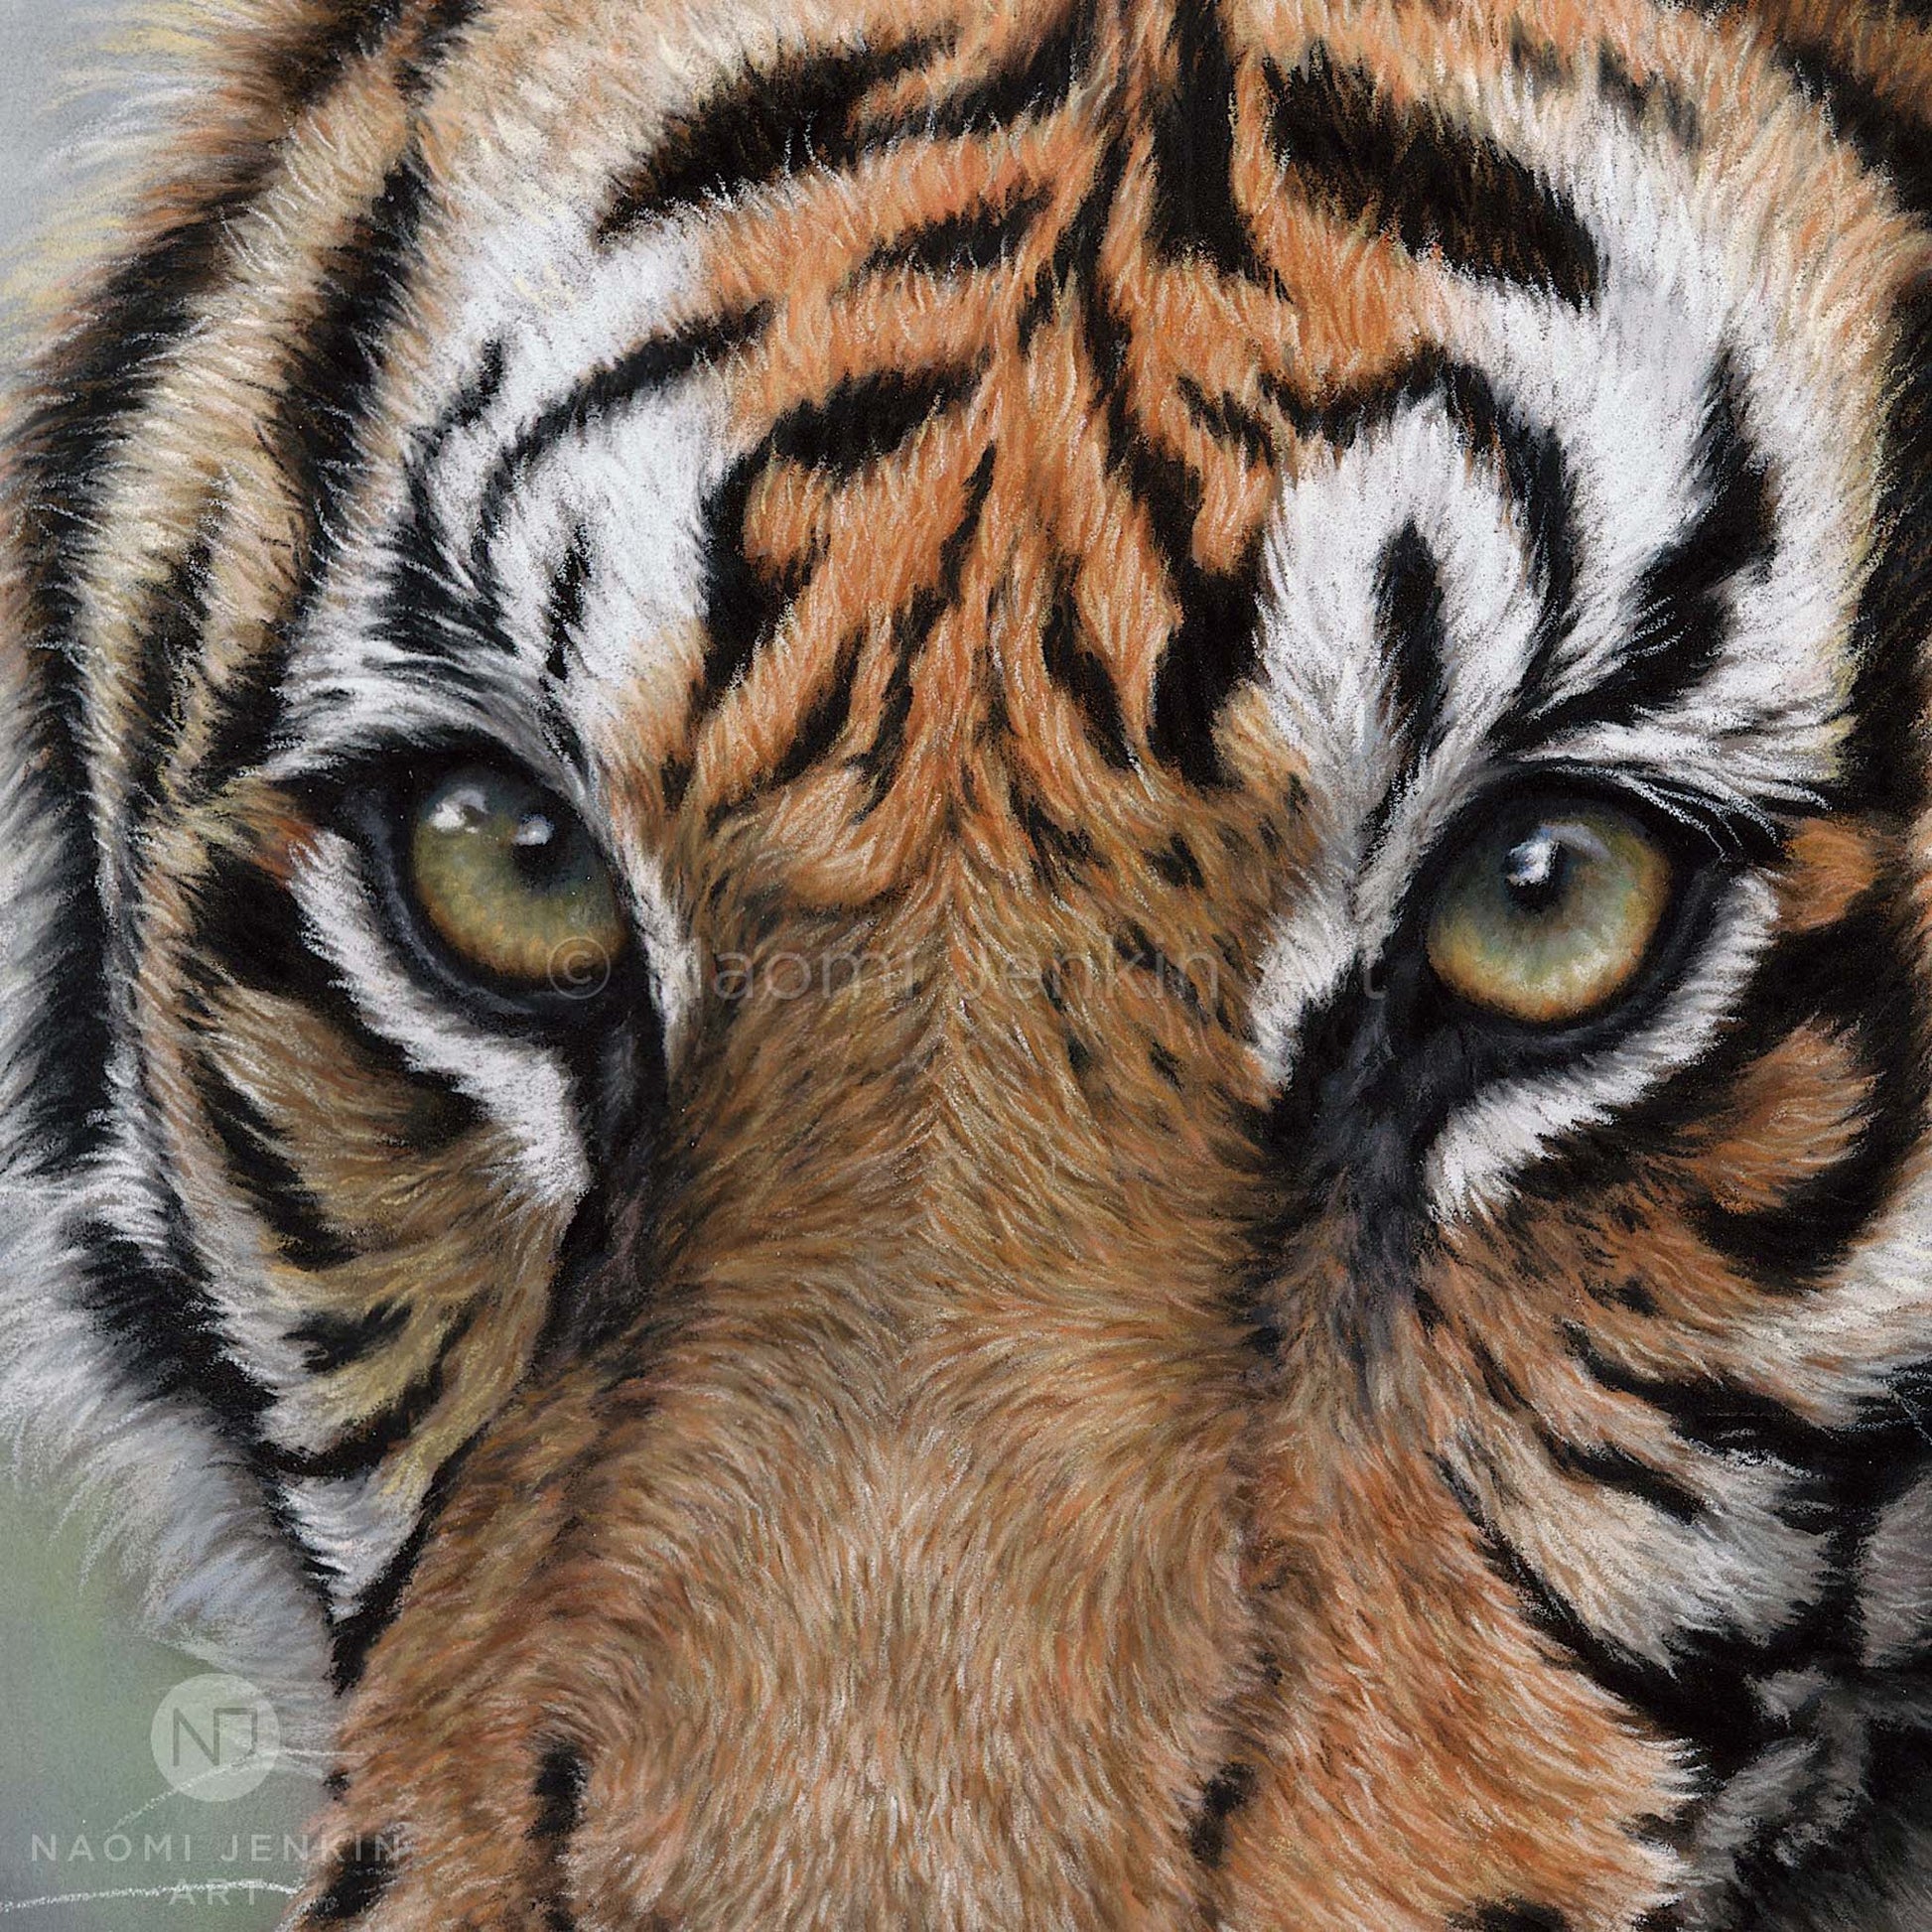 Close up details of a tiger painting "Stealth" by Naomi Jenkin Art.